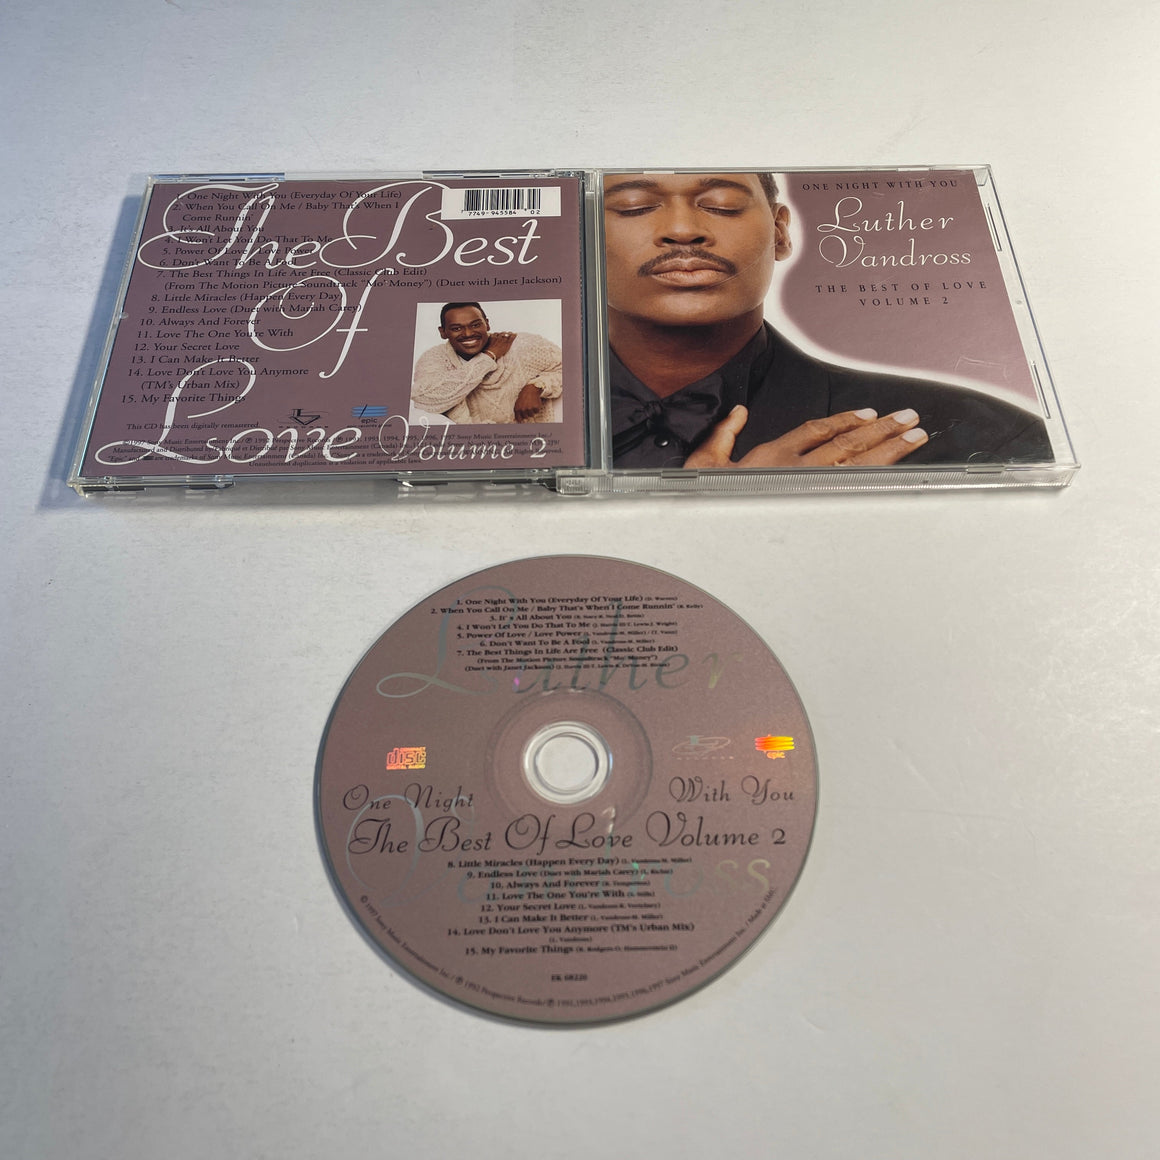 Luther Vandross One Night With You - The Best Of Love Volume 2 Used CD VG+\VG+